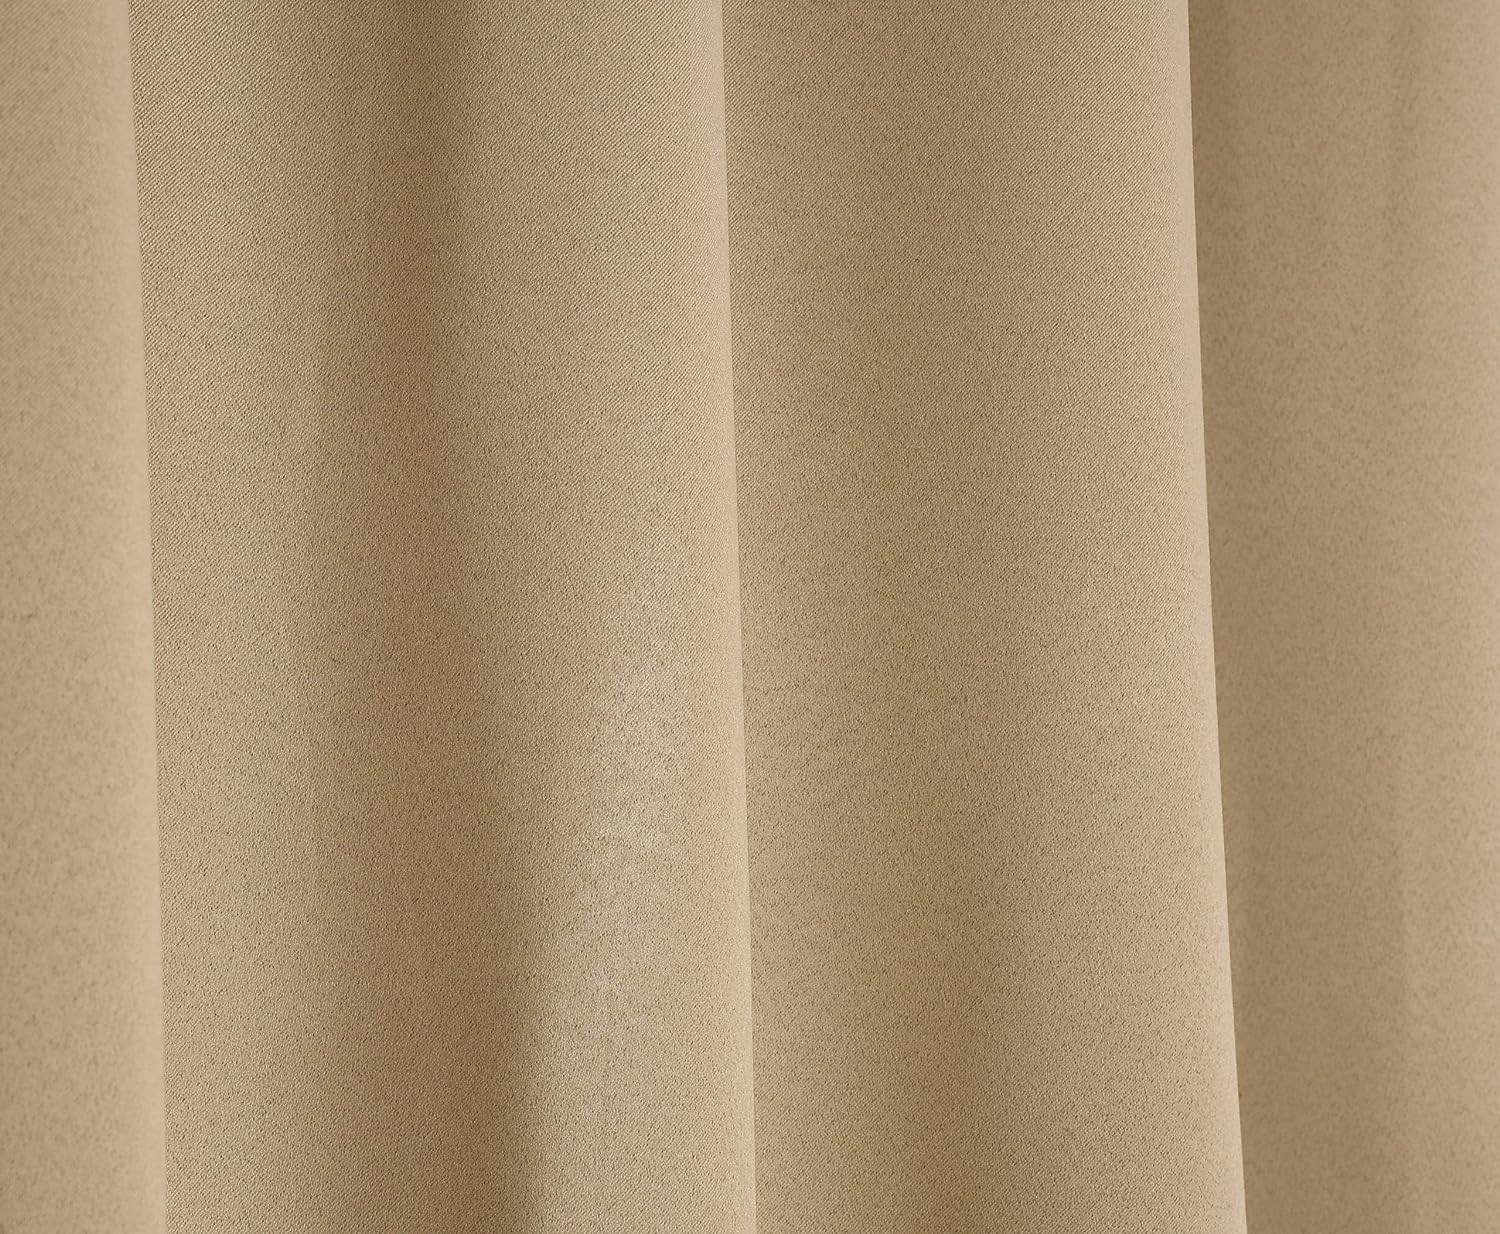 Kuber Industries 100% Room Darkening Black Out Curtain I 7 Feet Door Curtain I Insulated Heavy Polyester Solid Curtain|Drapes with 8 Eyelet for Home & Office (Light Chocolate)